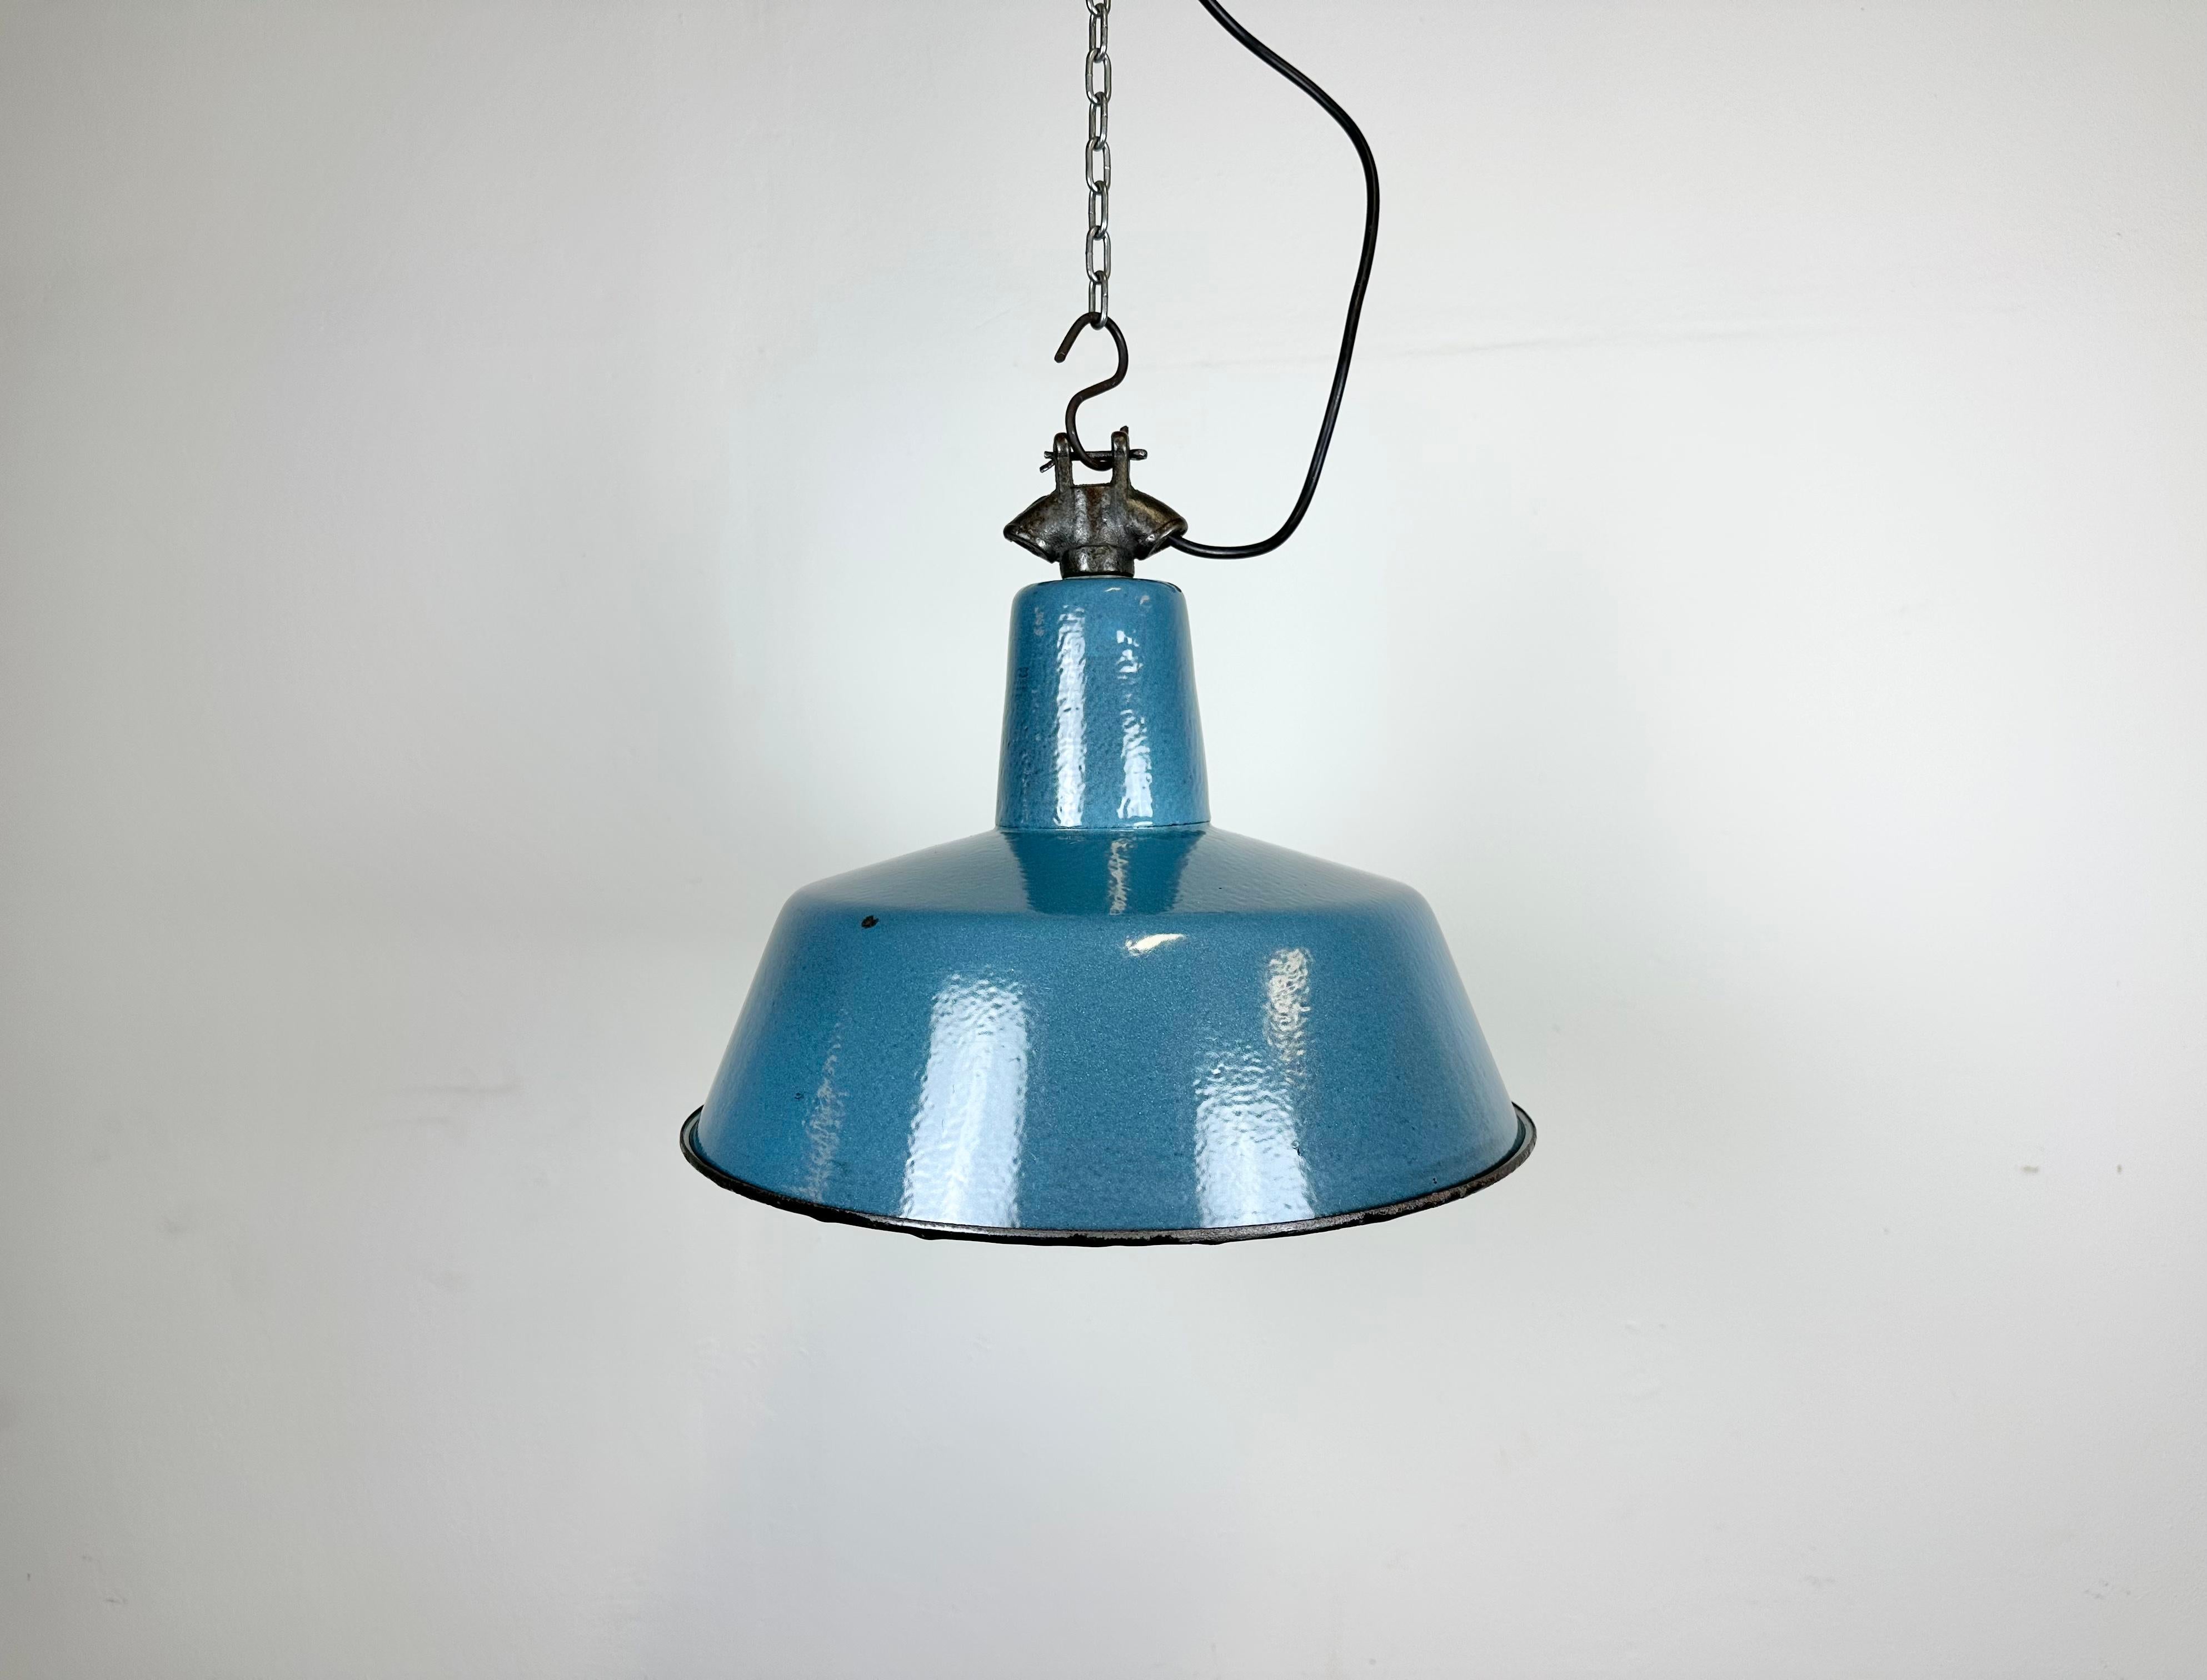 Industrial blue enamel pendant light made by Polam Wilkasy in Poland during the 1960s. White enamel inside the shade. Cast iron top. The porcelain socket requires E 27/ E 26 light bulbs. New wire. The weight of the lamp is 1,5 kg.